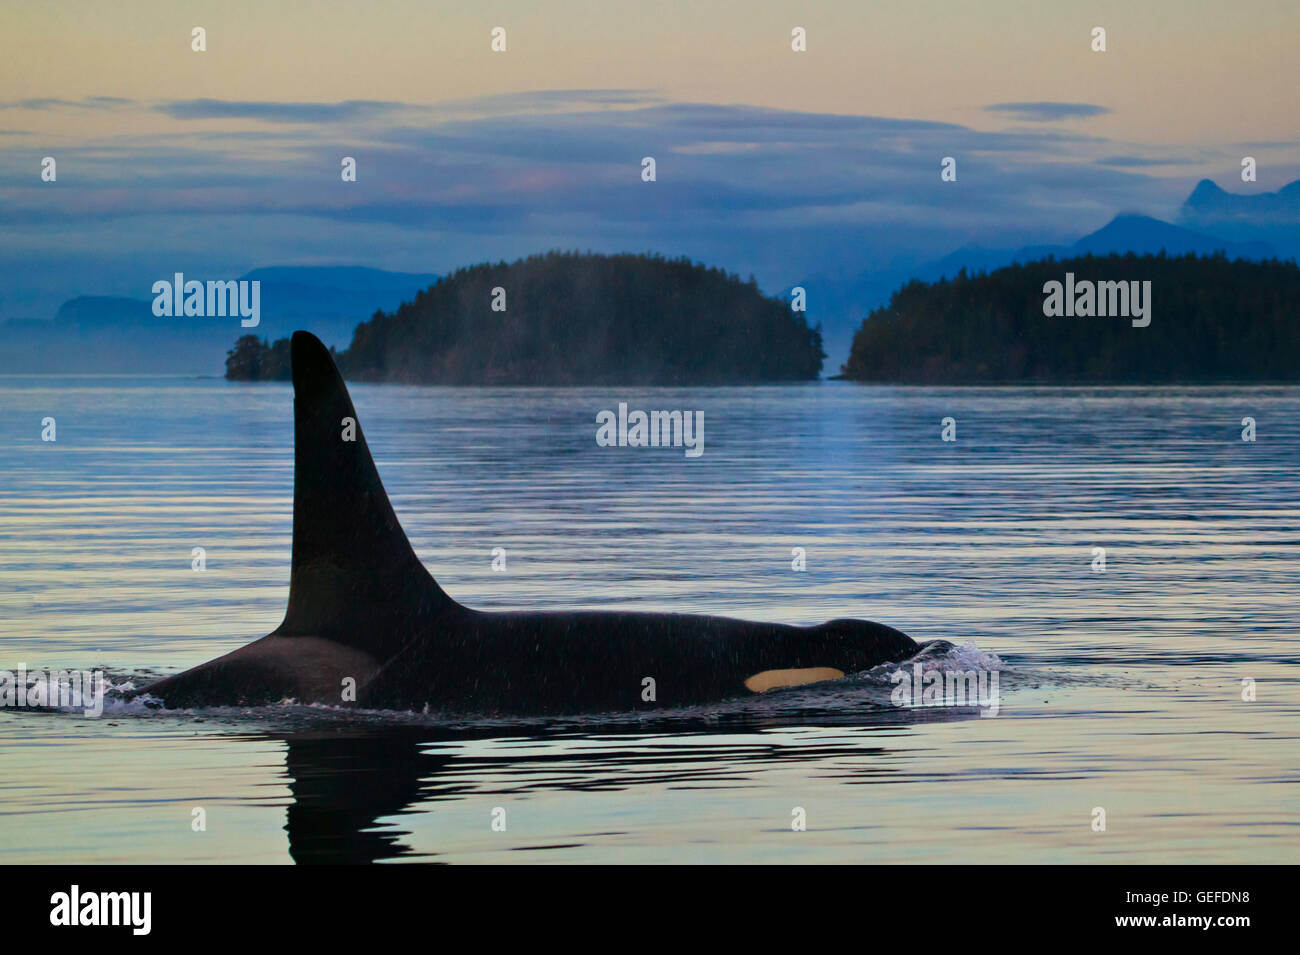 Zoology / animals, mammal / mammalian, Male northern resident, fish eating orca whale (killer whale) off Northern Vancouver Island coastline, British Columbia, Canada, Stock Photo